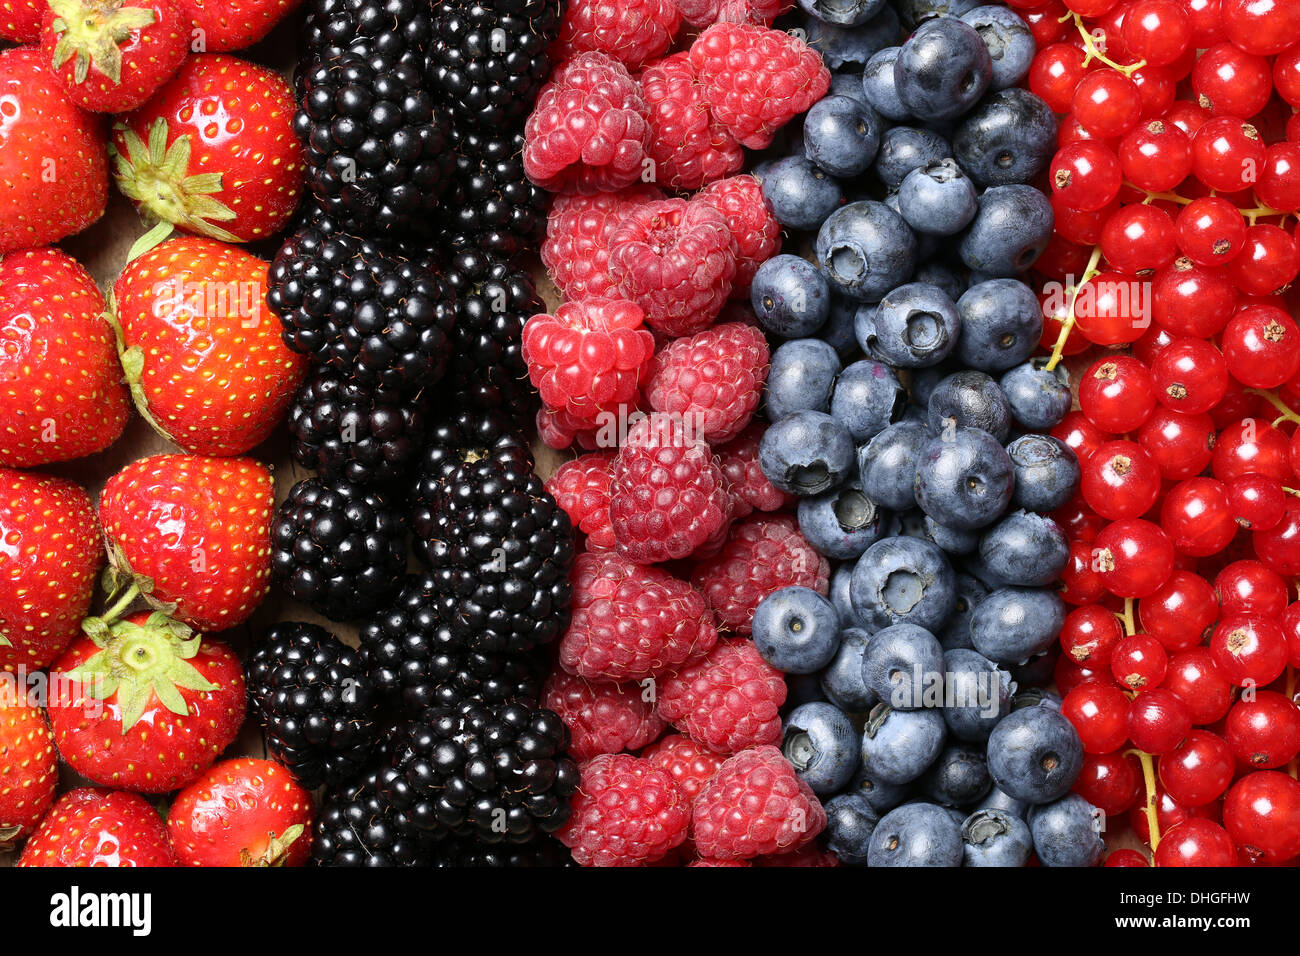 Berry fruits like strawberries, blueberries, red currants, raspberries and  blackberries in a row Stock Photo - Alamy